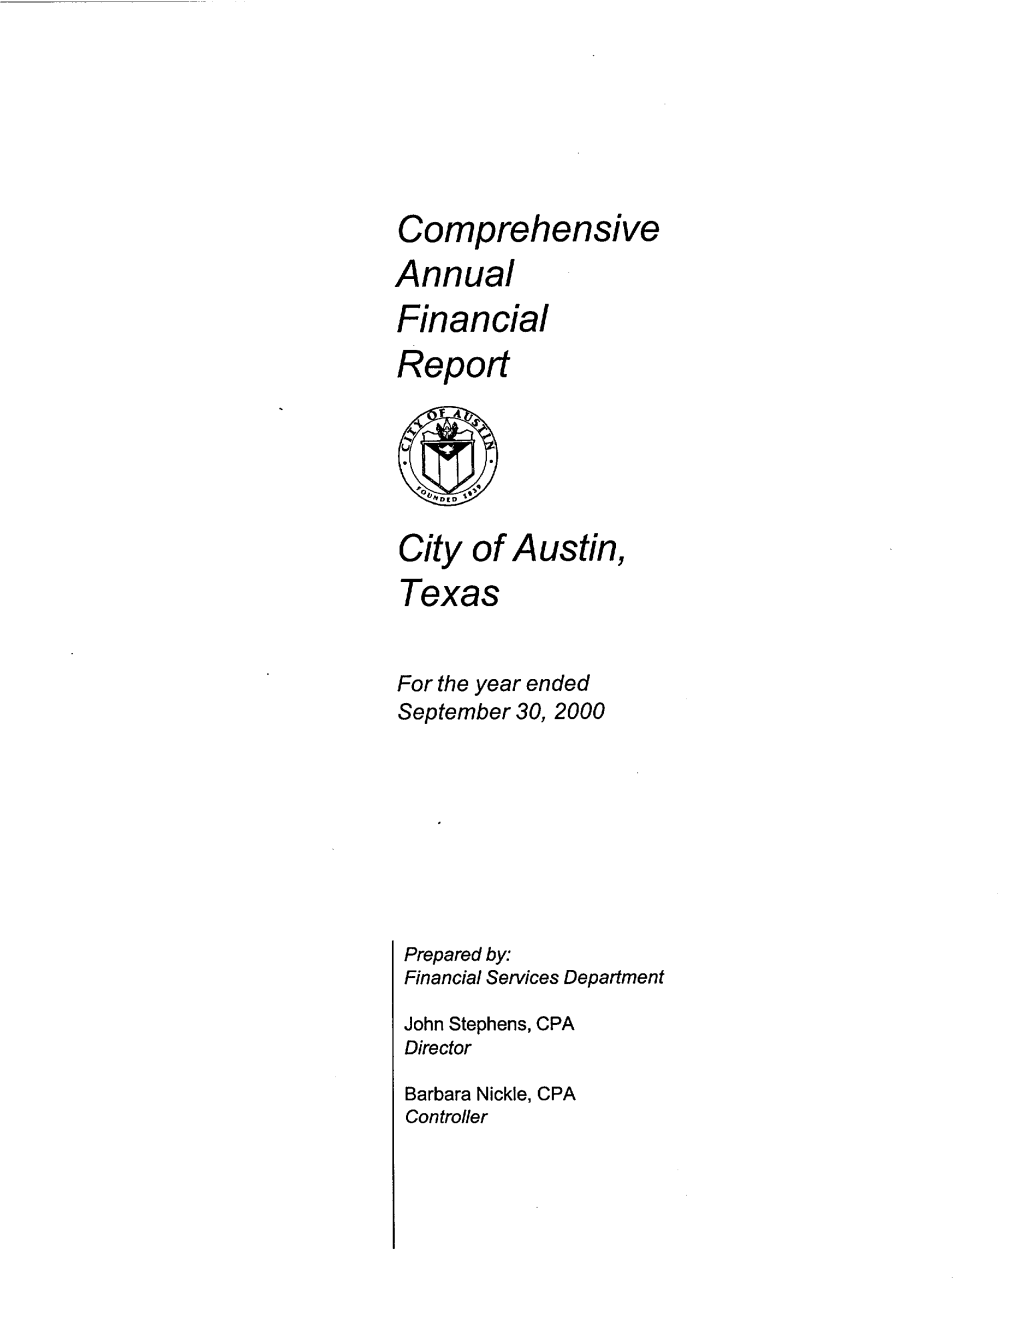 Comprehensive Annual Financial Report City of Austin, Texas